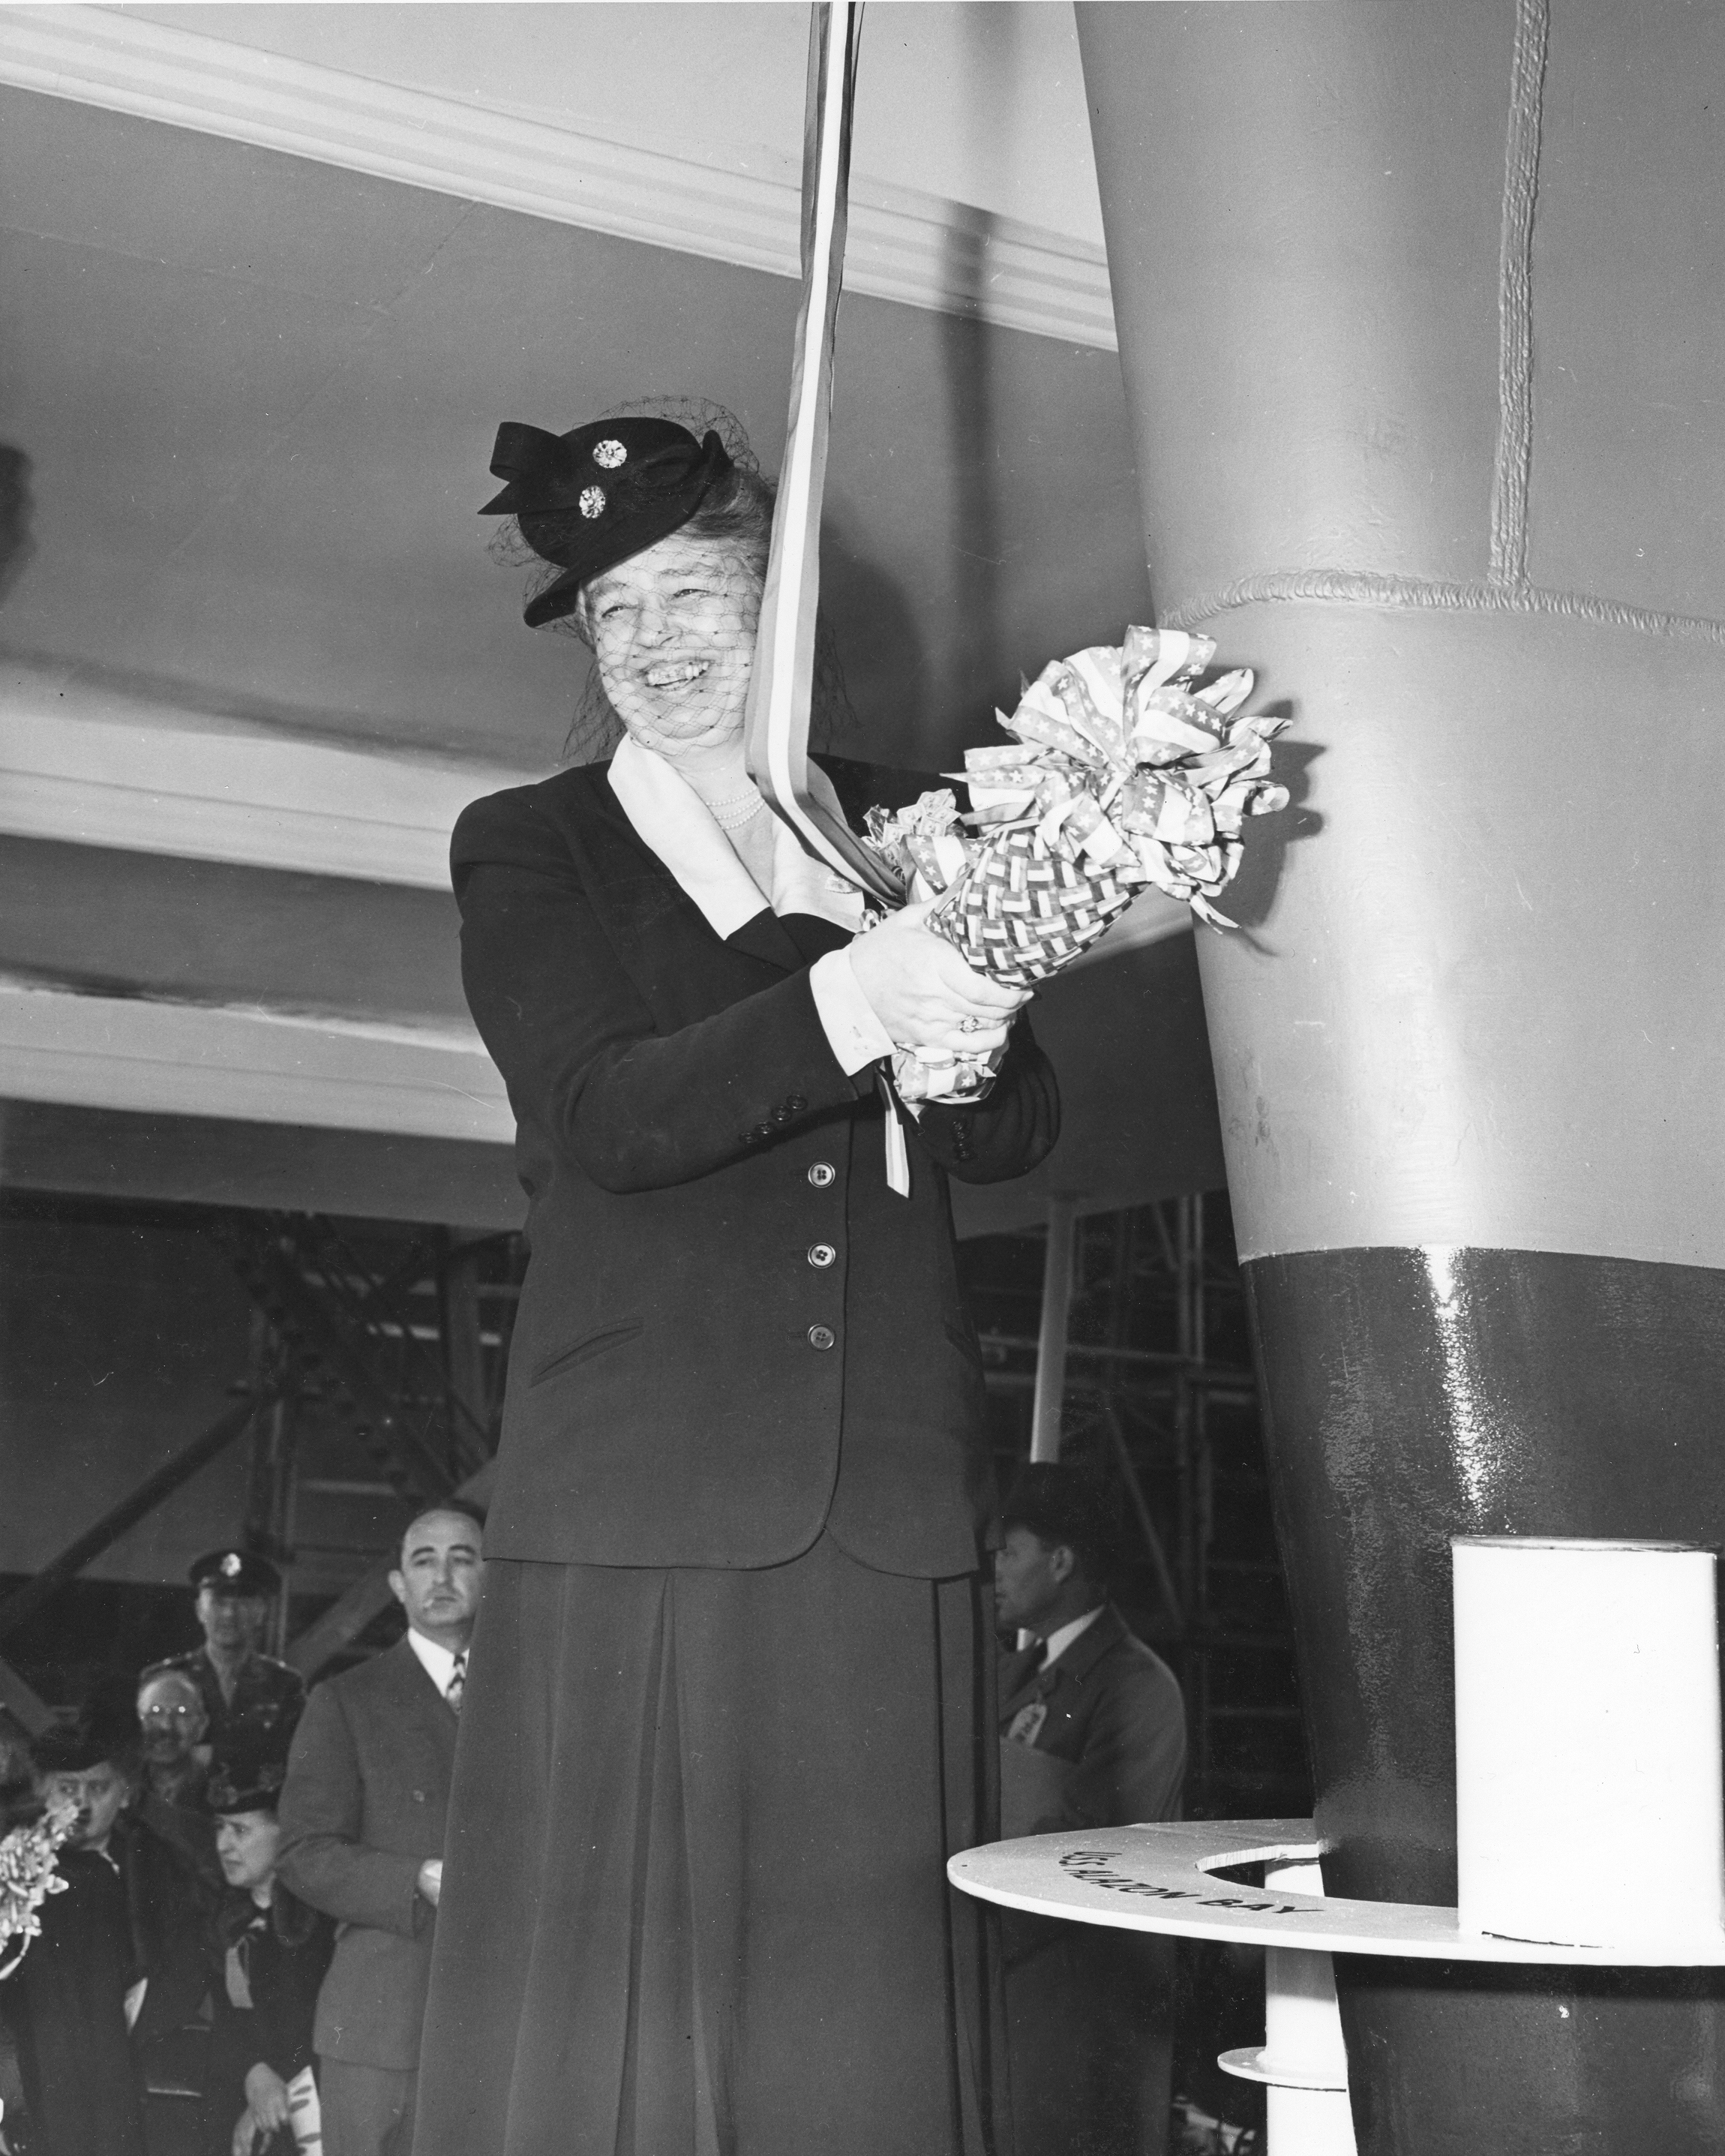 First Lady Eleanor Roosevelt preparing to christen the USS Casablanca, the lead ship in a new class of escort carriers, 5 Apr 1943, Kaiser Shipyards, Vancouver, Washington, United States.